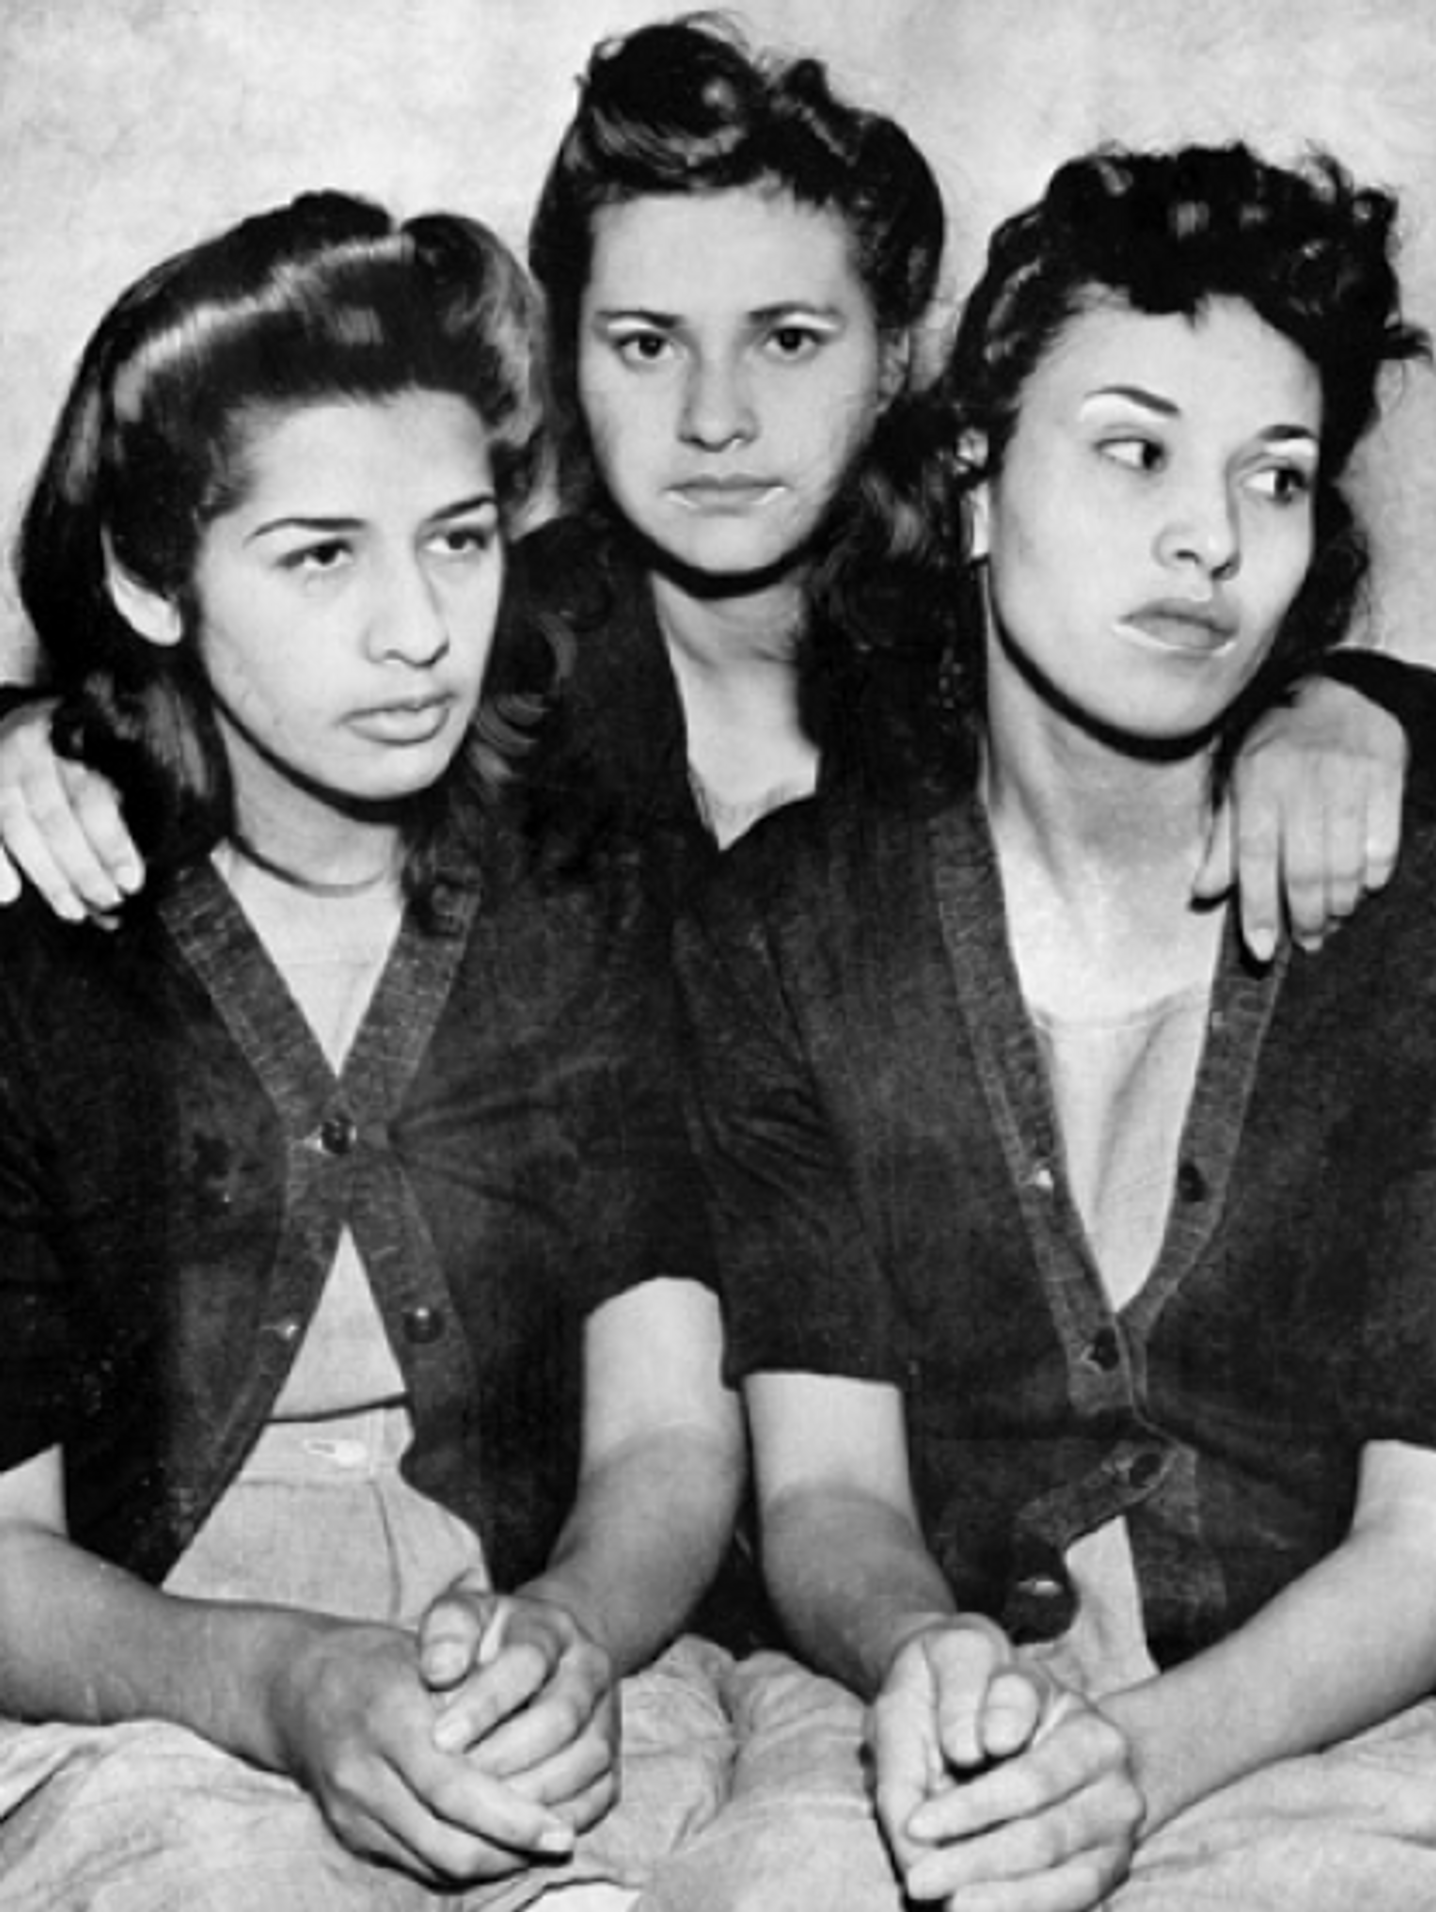 Three women, Dora Barrios, Frances Silva, and Lorena Encinas, standing together in a posed group portrait.